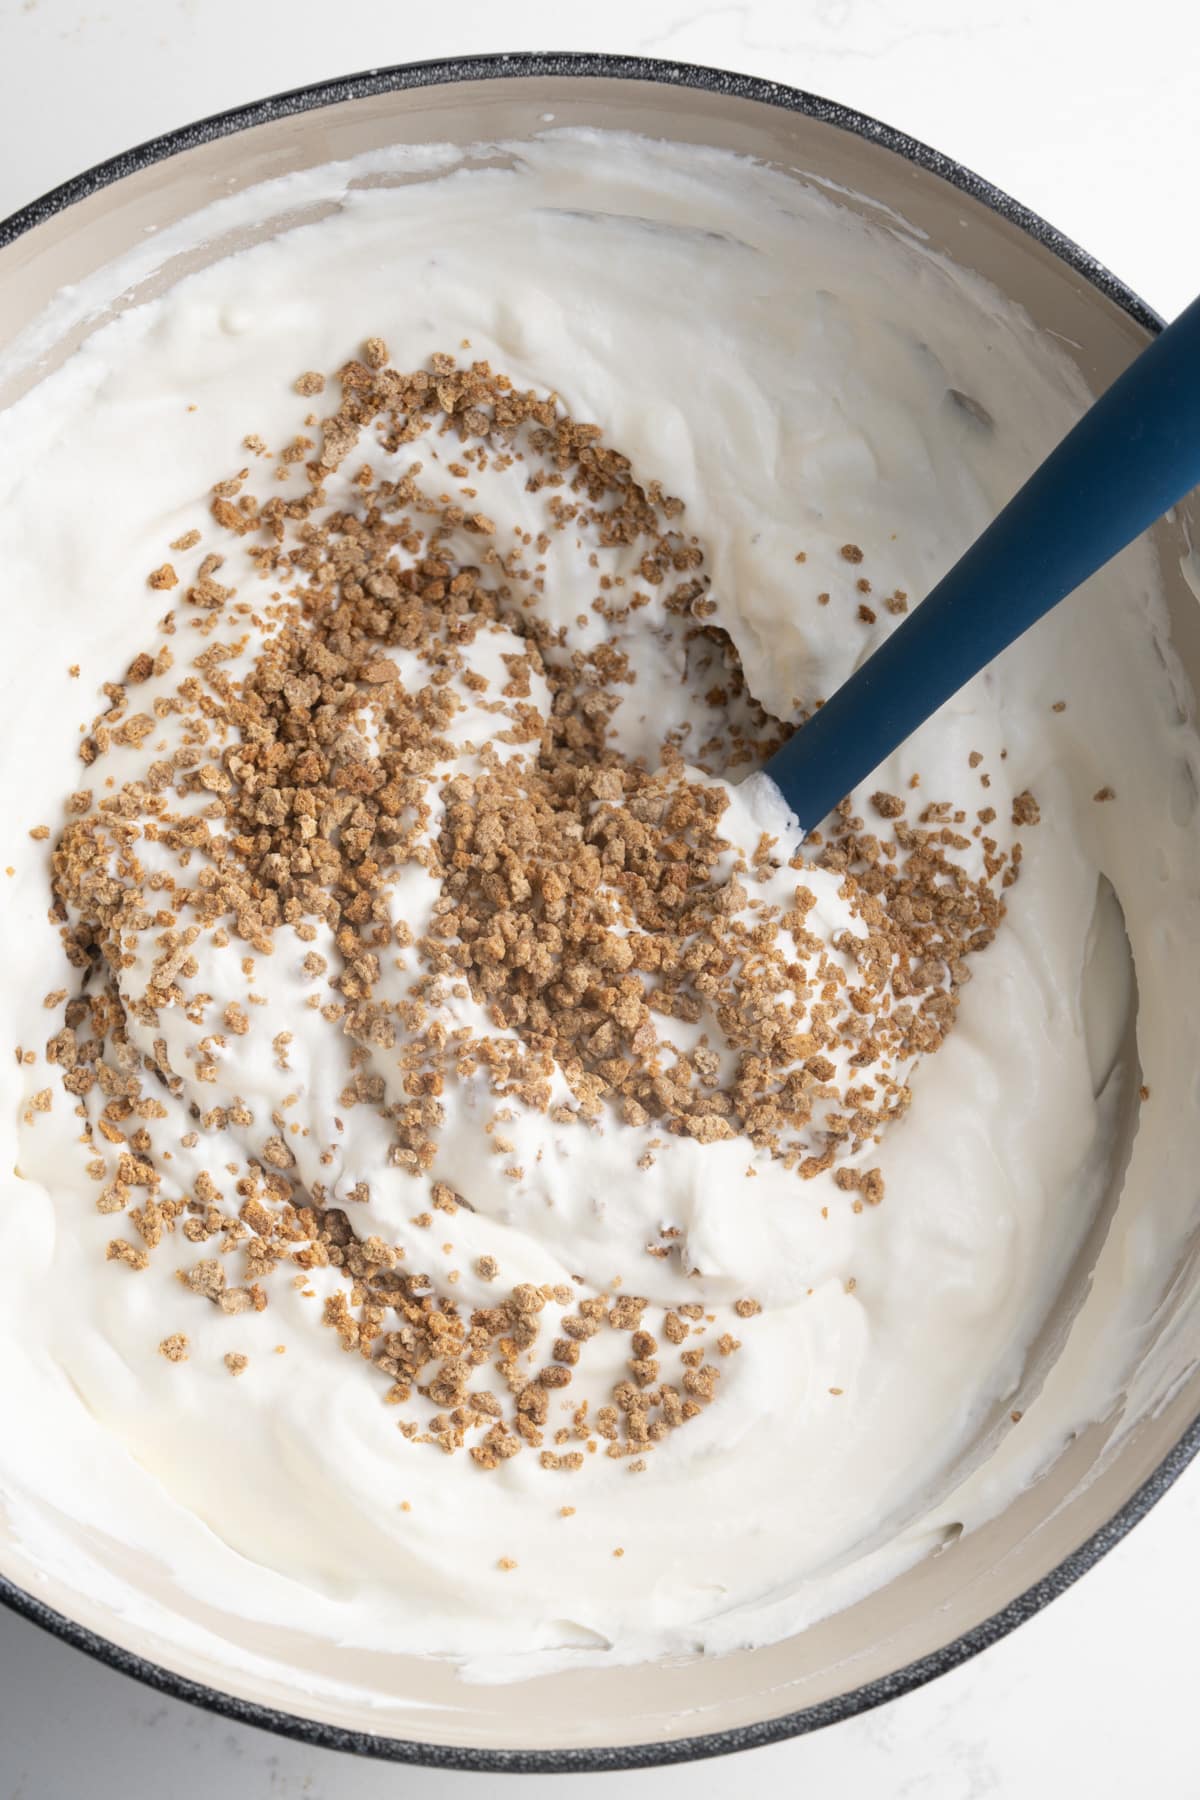 greape nut cereal being added to ice cream base